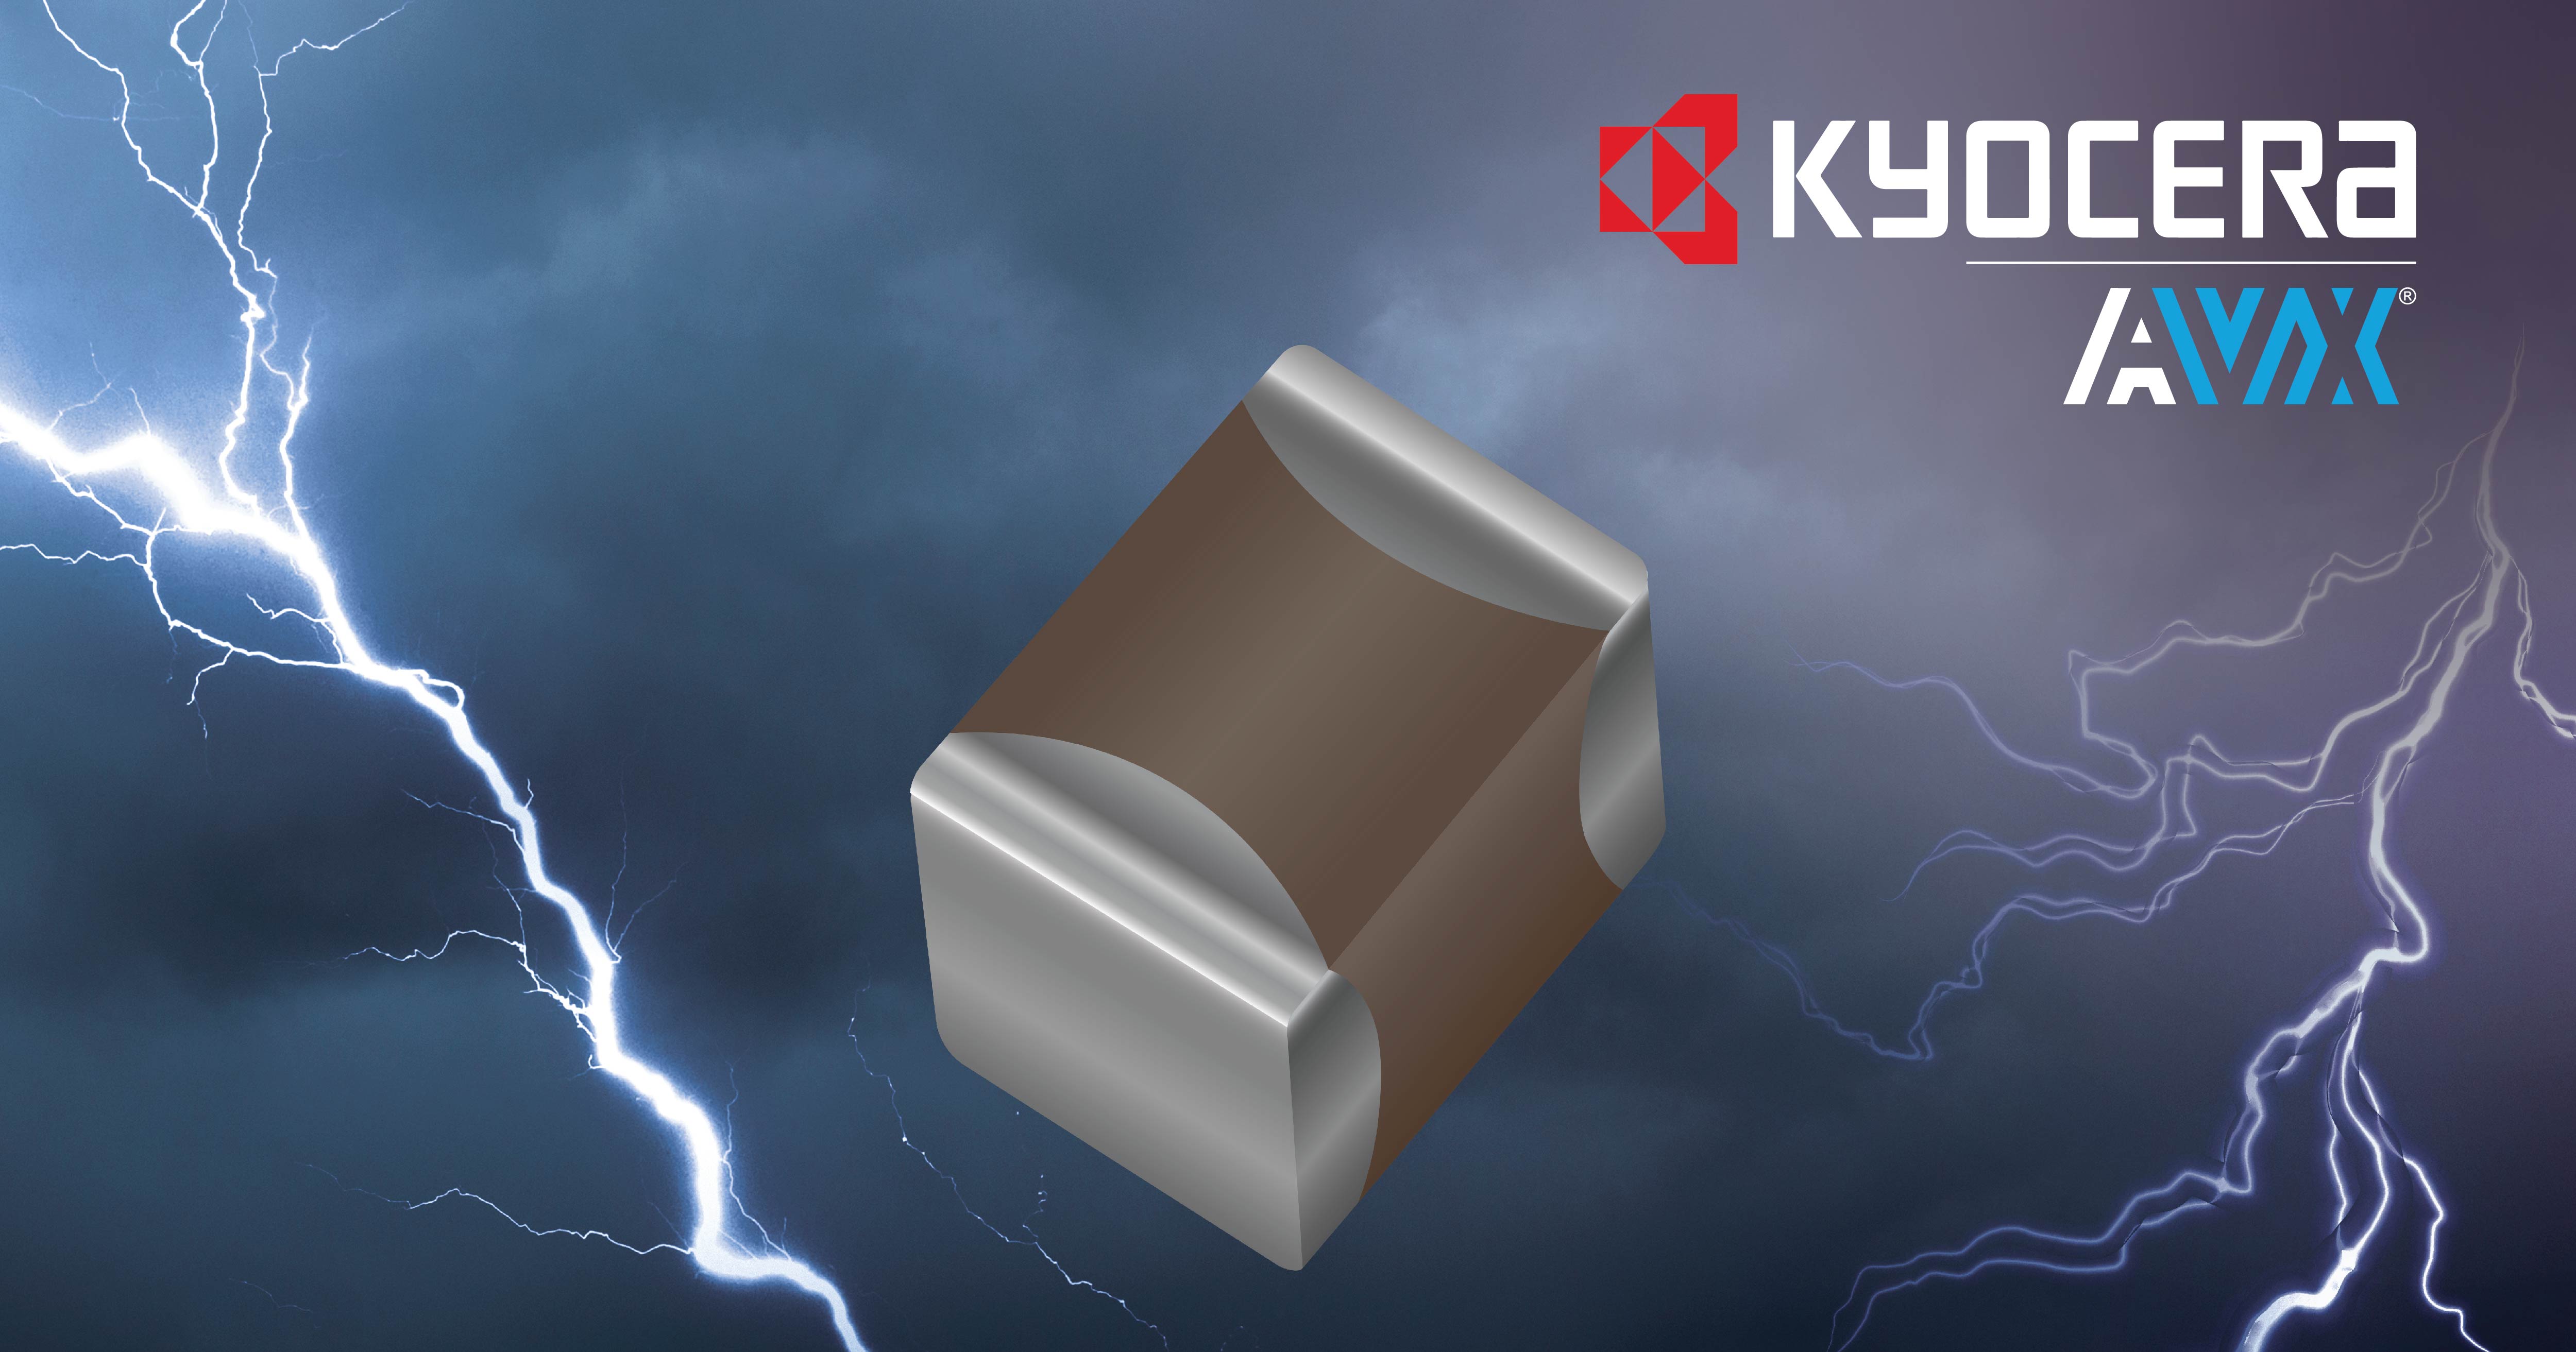 KYOCERA AVX Adds Safety-Certified Capacitors to its Extensive MLCC Product Portfolio